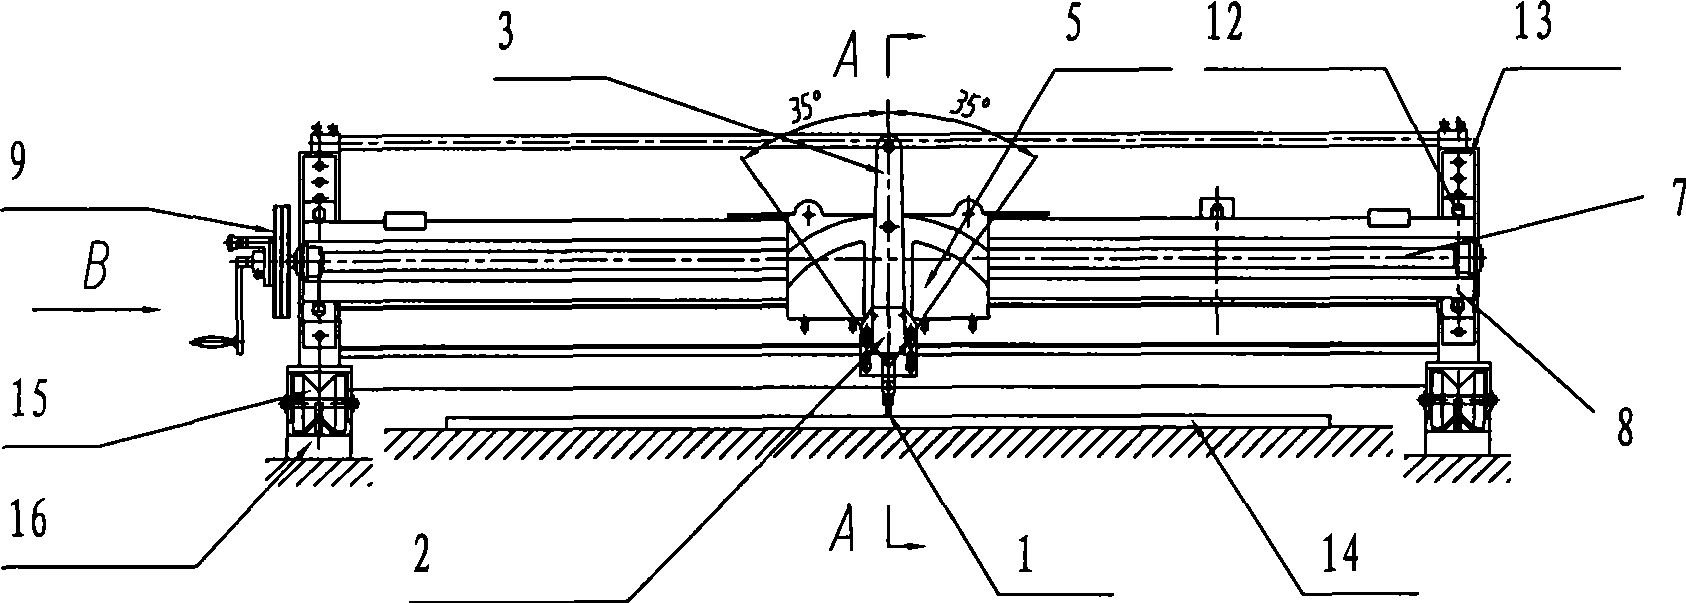 Leather belt grooving apparatus and method